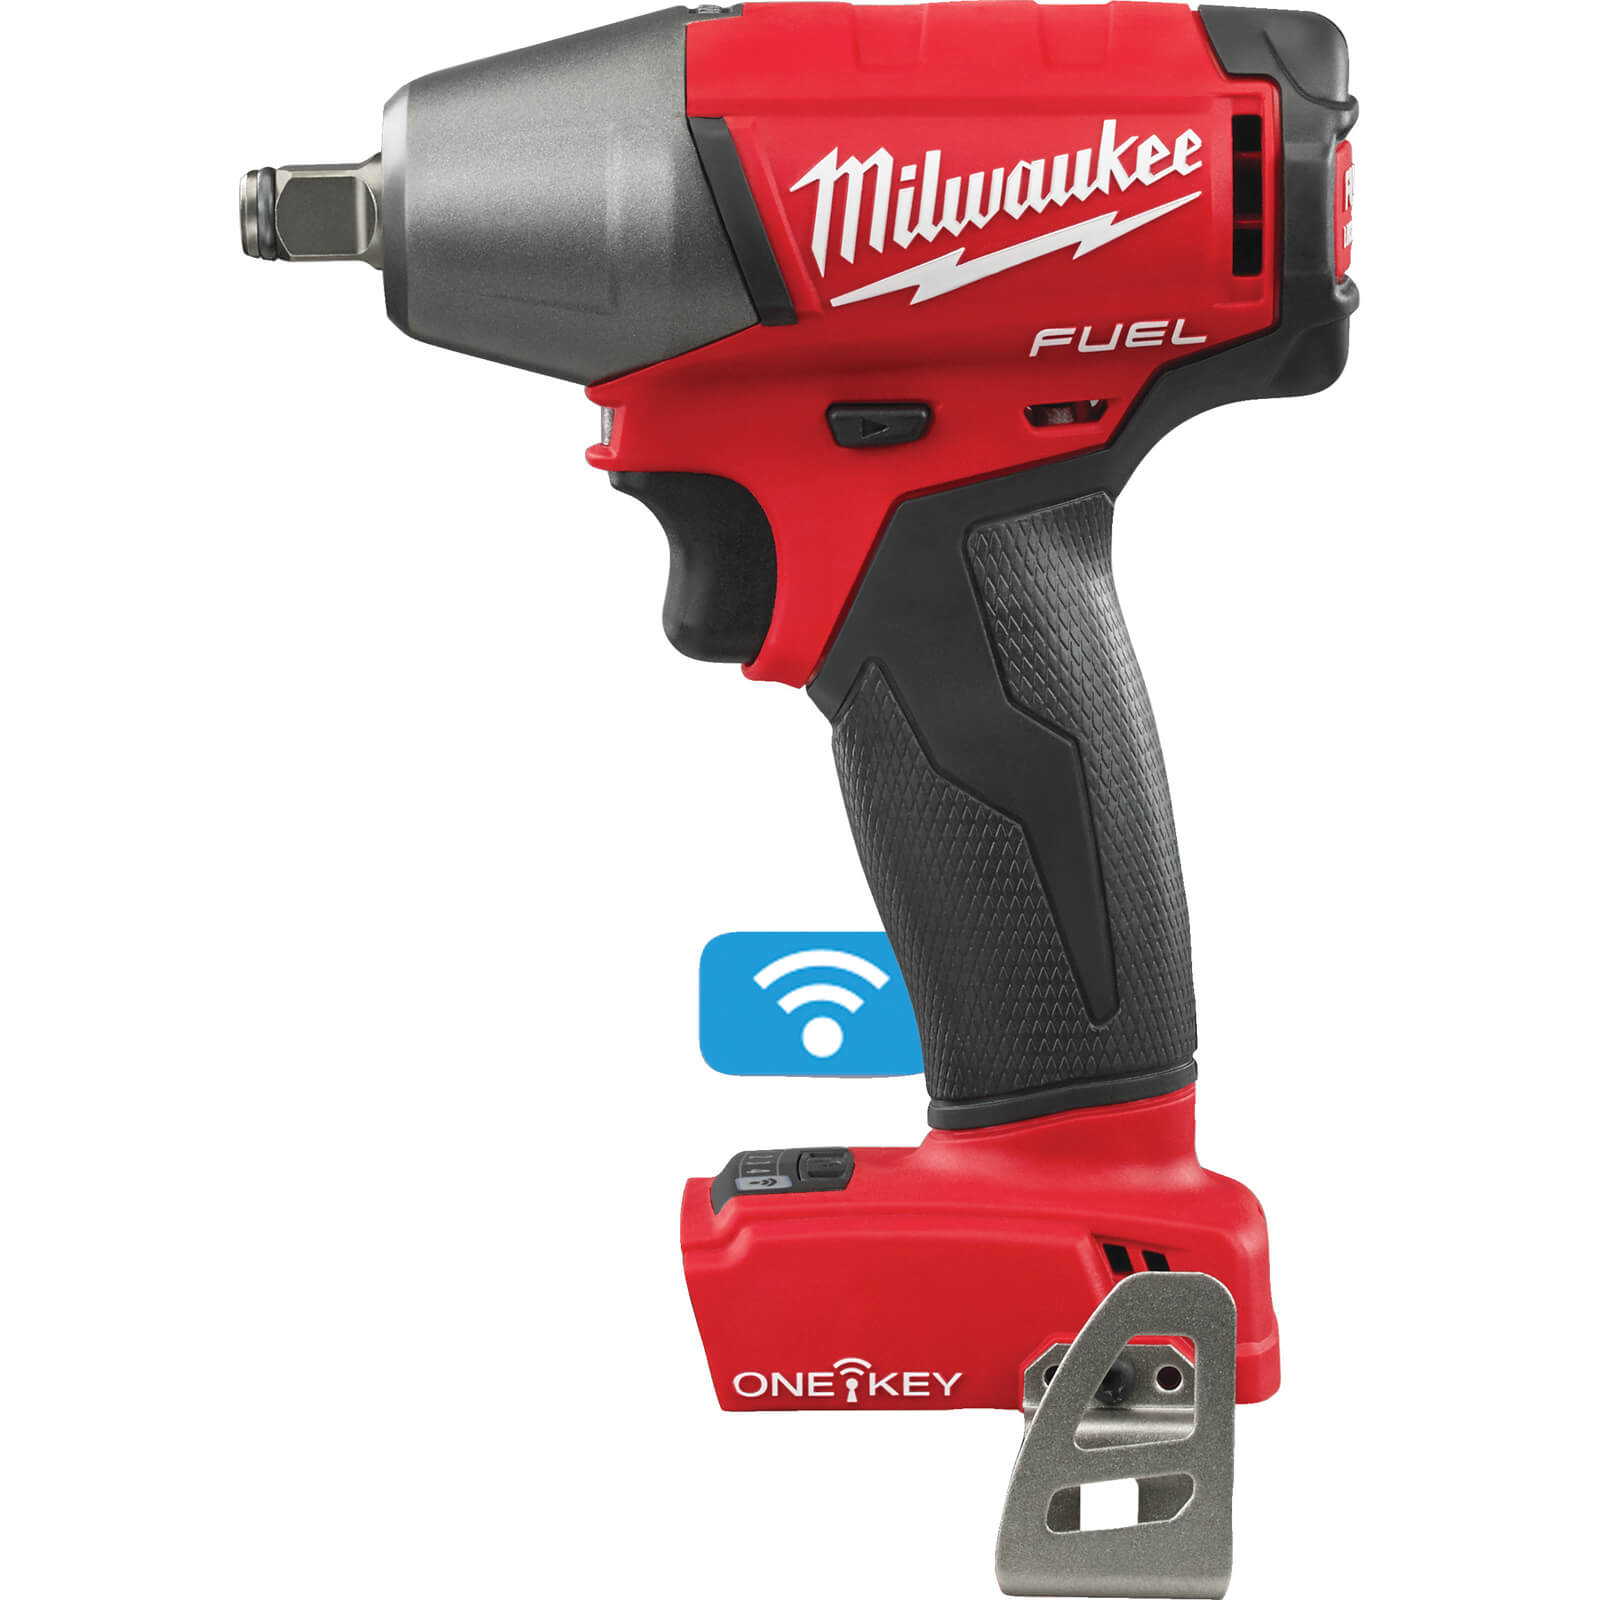 Image of Milwaukee M18 ONEIWF12 Fuel 18v Cordless Brushless 1/2" Drive Impact Wrench No Batteries No Charger No Case